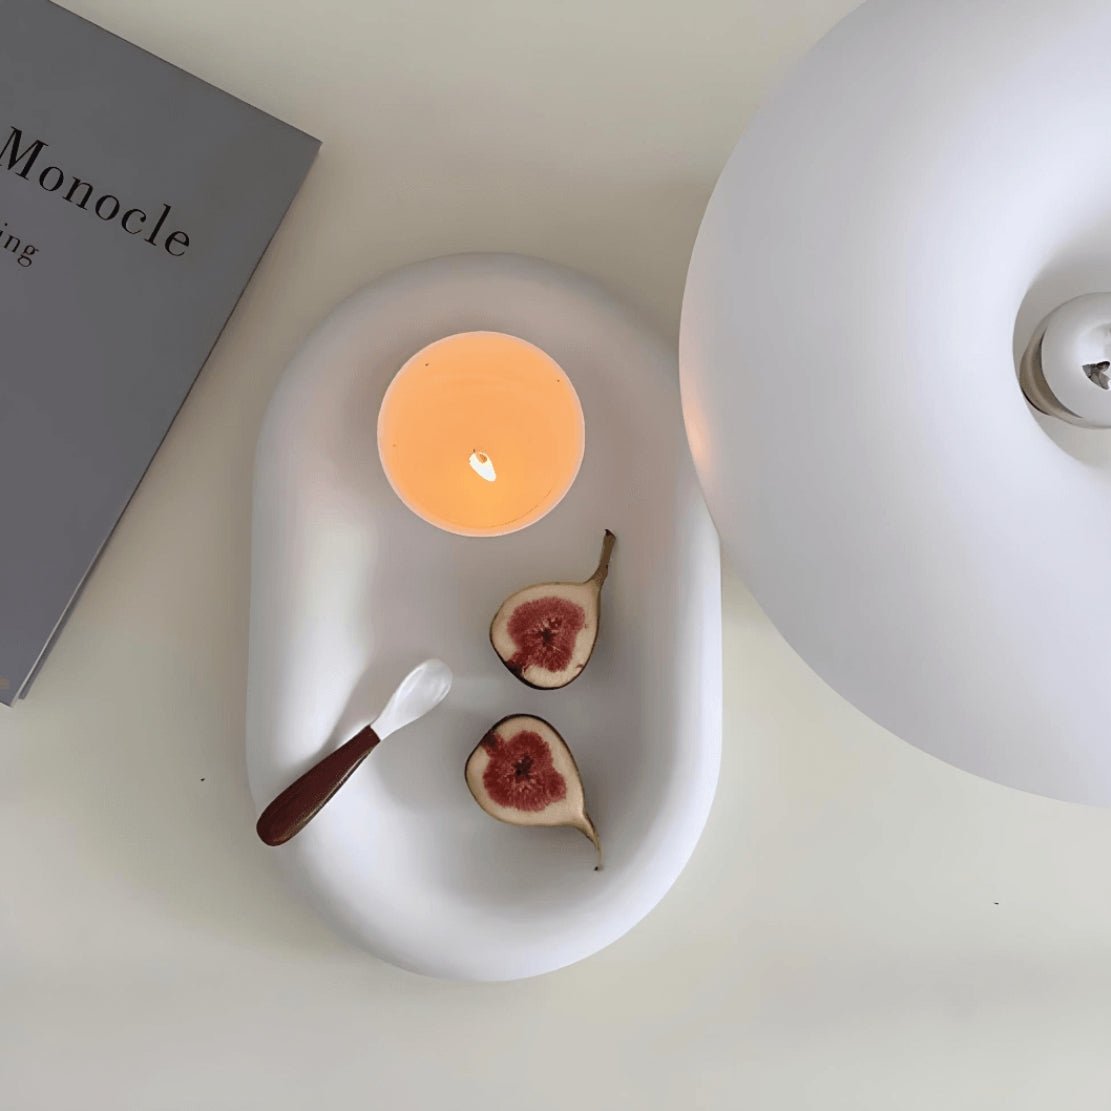 White, ceramic dish with a chunky, oval design, holding a fig and a candle